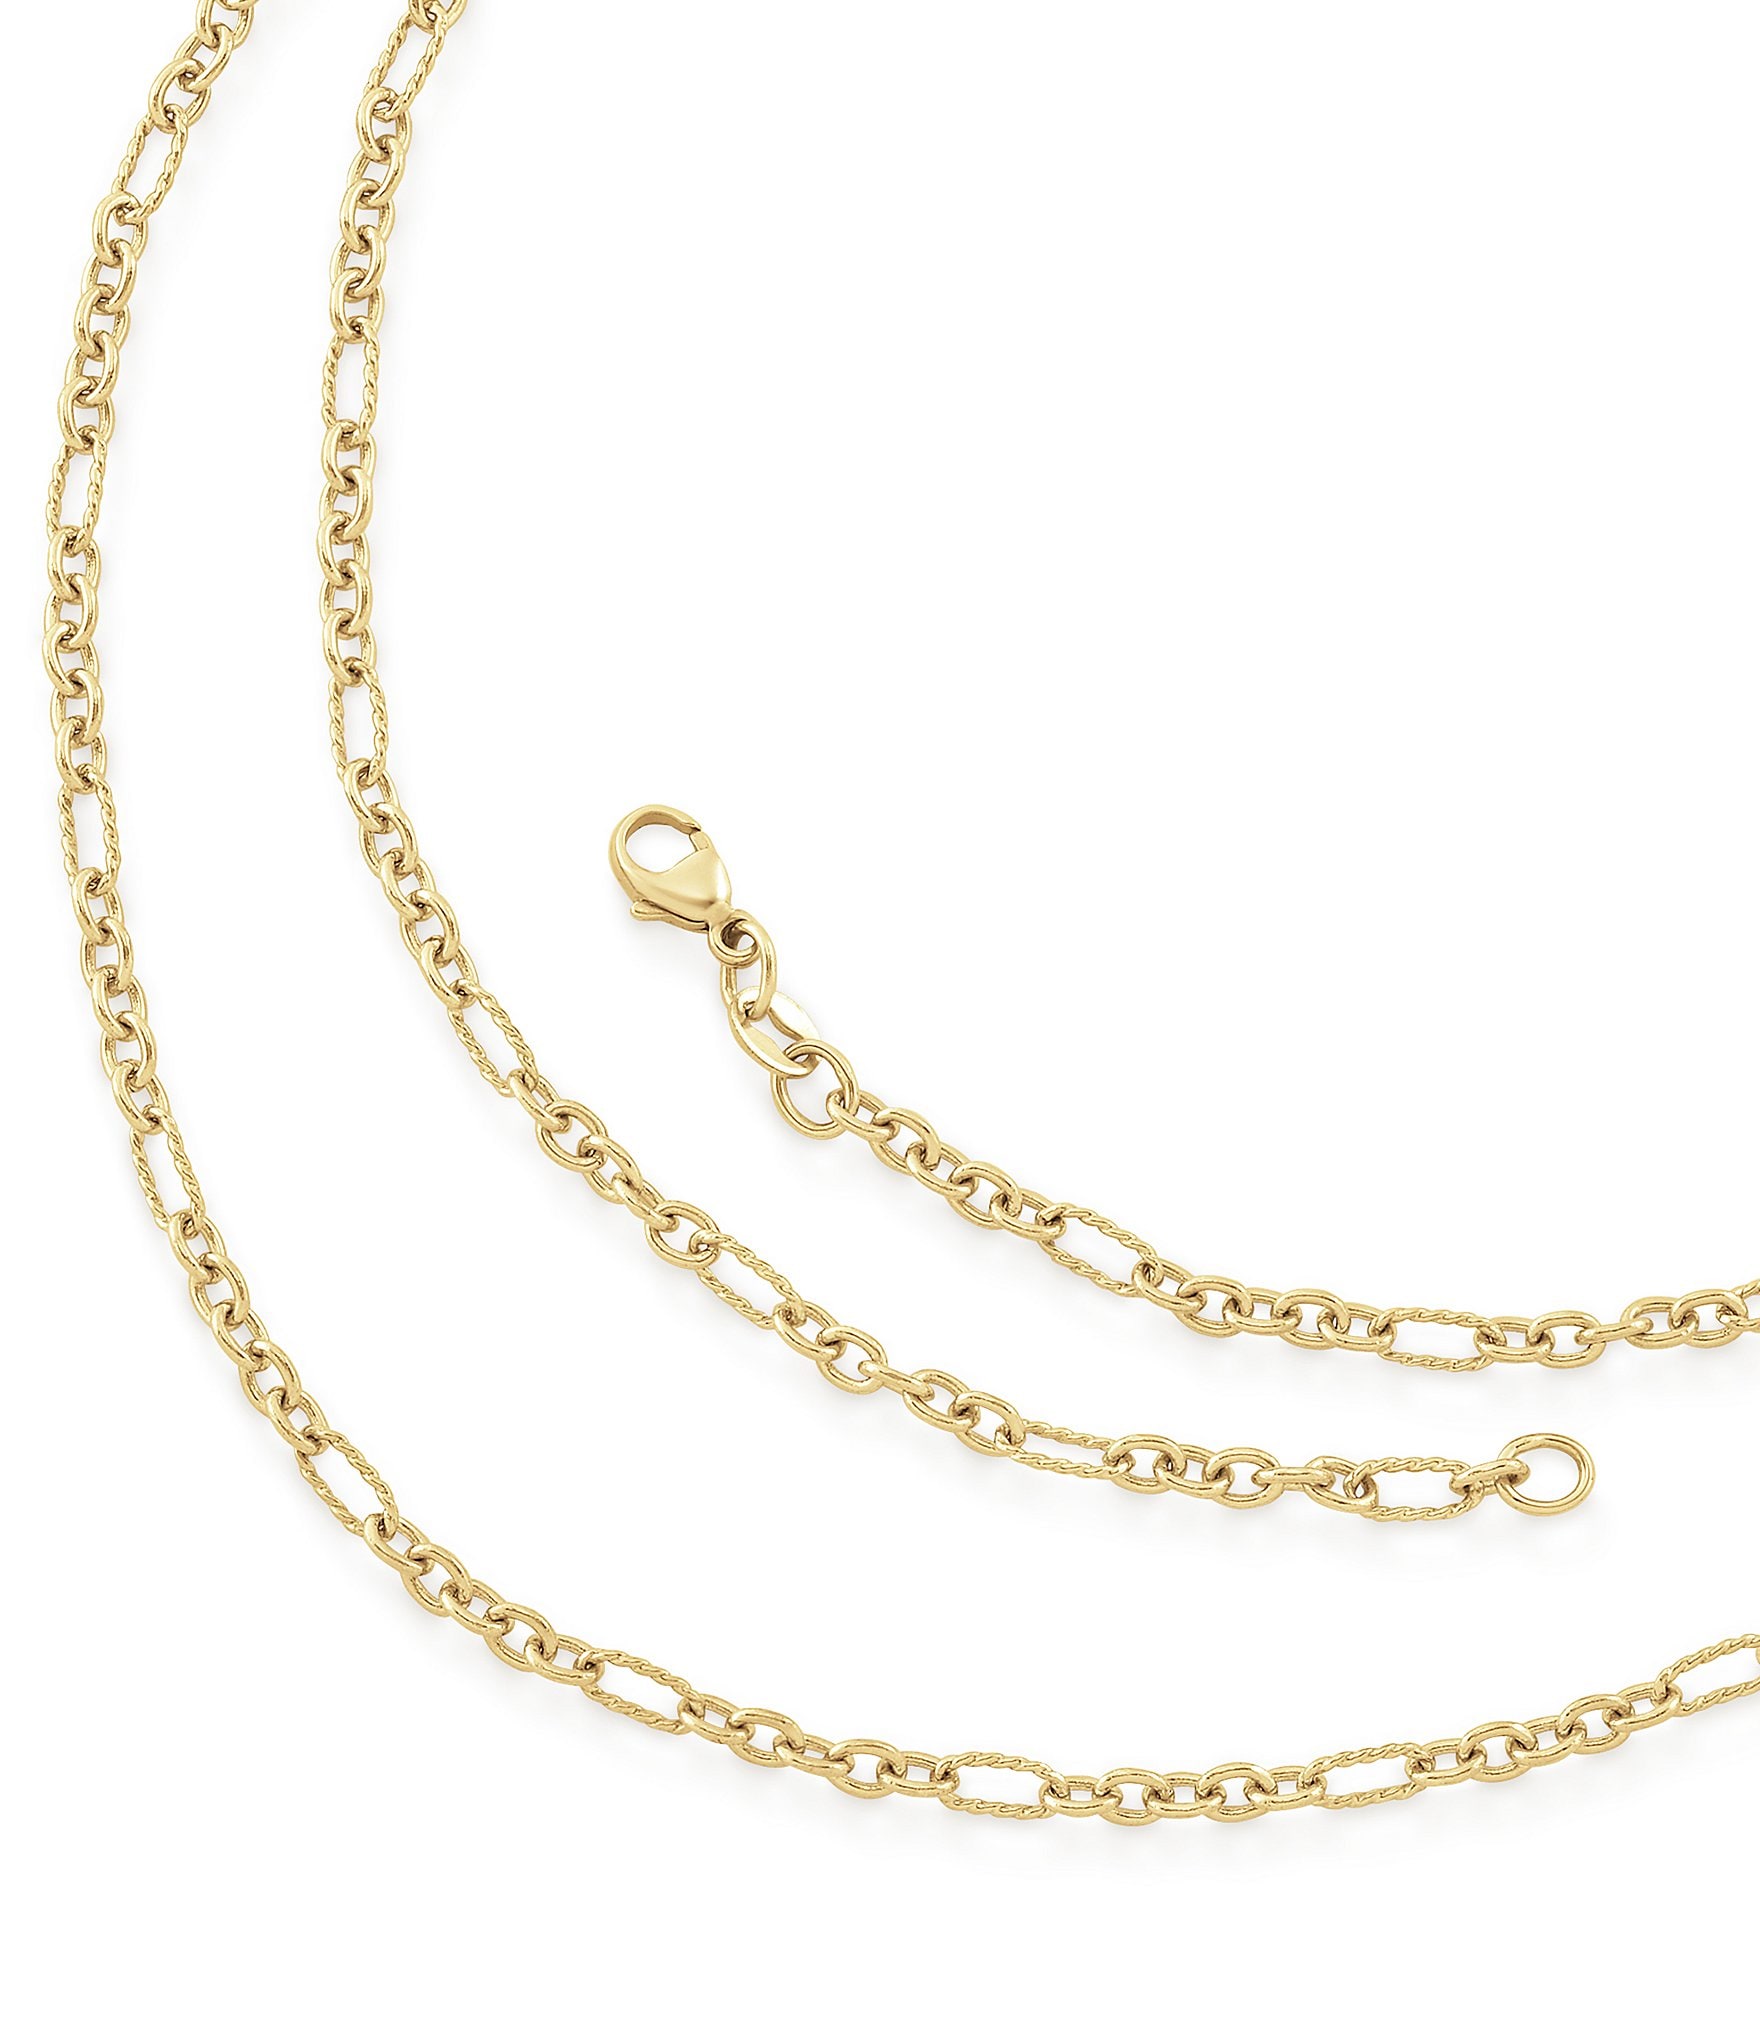 Fossil Barbie™ x Fossil Limited Edition Gold-Tone Stainless Steel Chain  Necklace